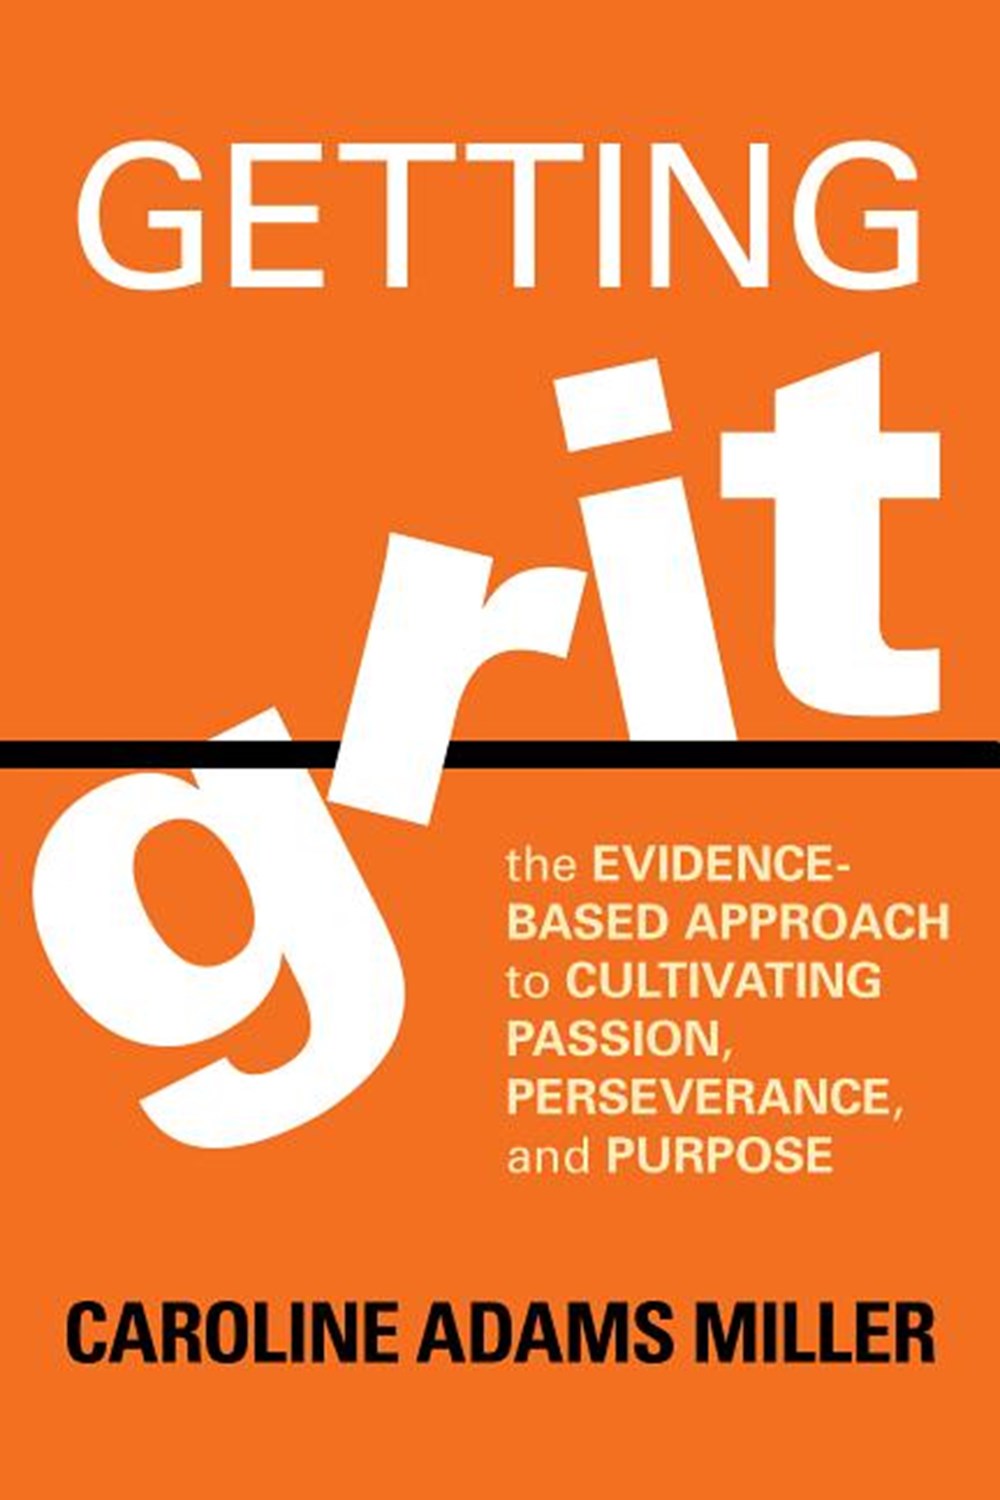 Getting Grit The Evidence-Based Approach to Cultivating Passion, Perseverance, and Purpose